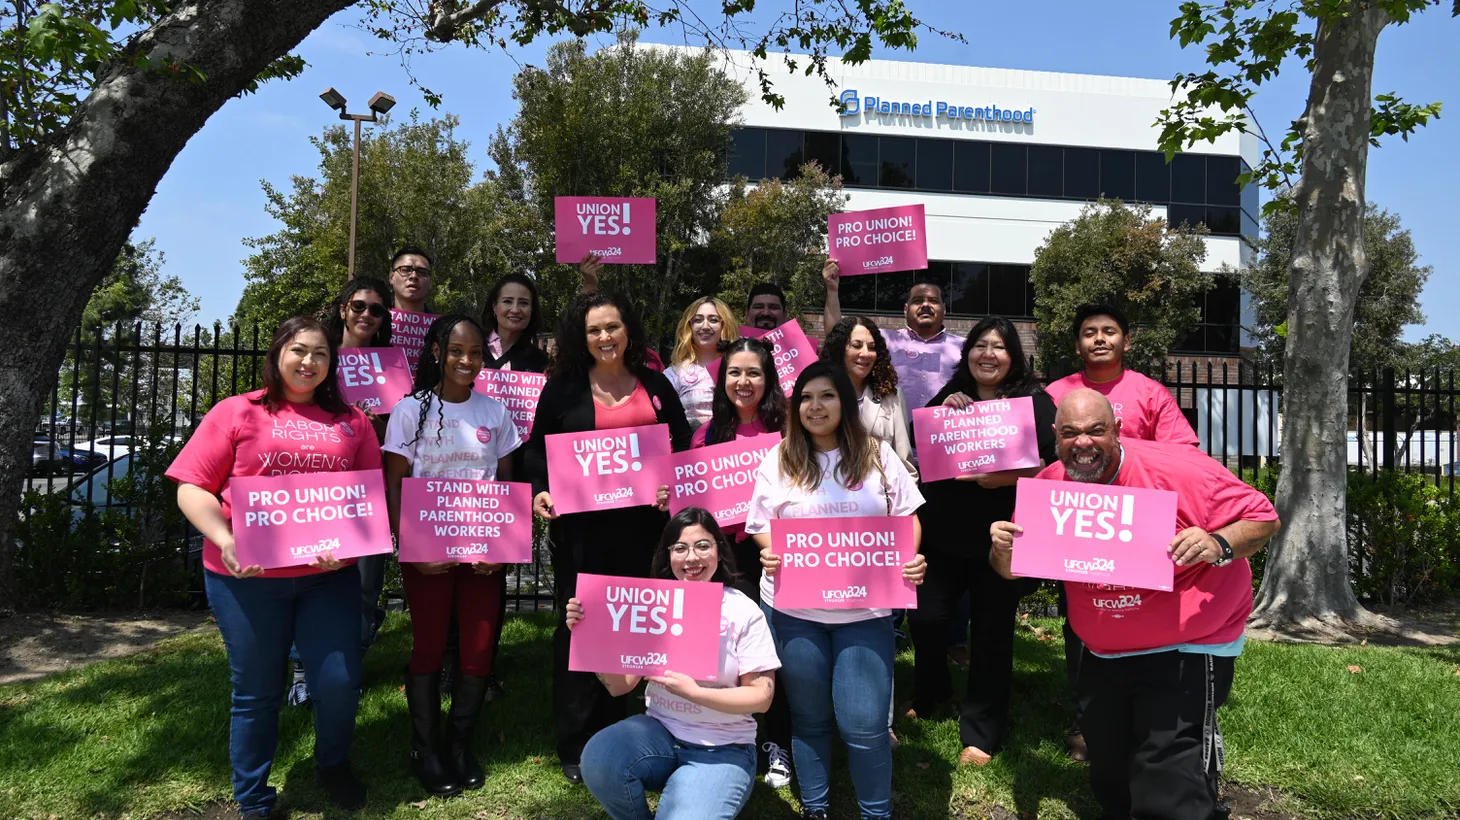 Workers at Planned Parenthood clinics in Orange County announced their intent to unionize in May at an event in Anaheim.